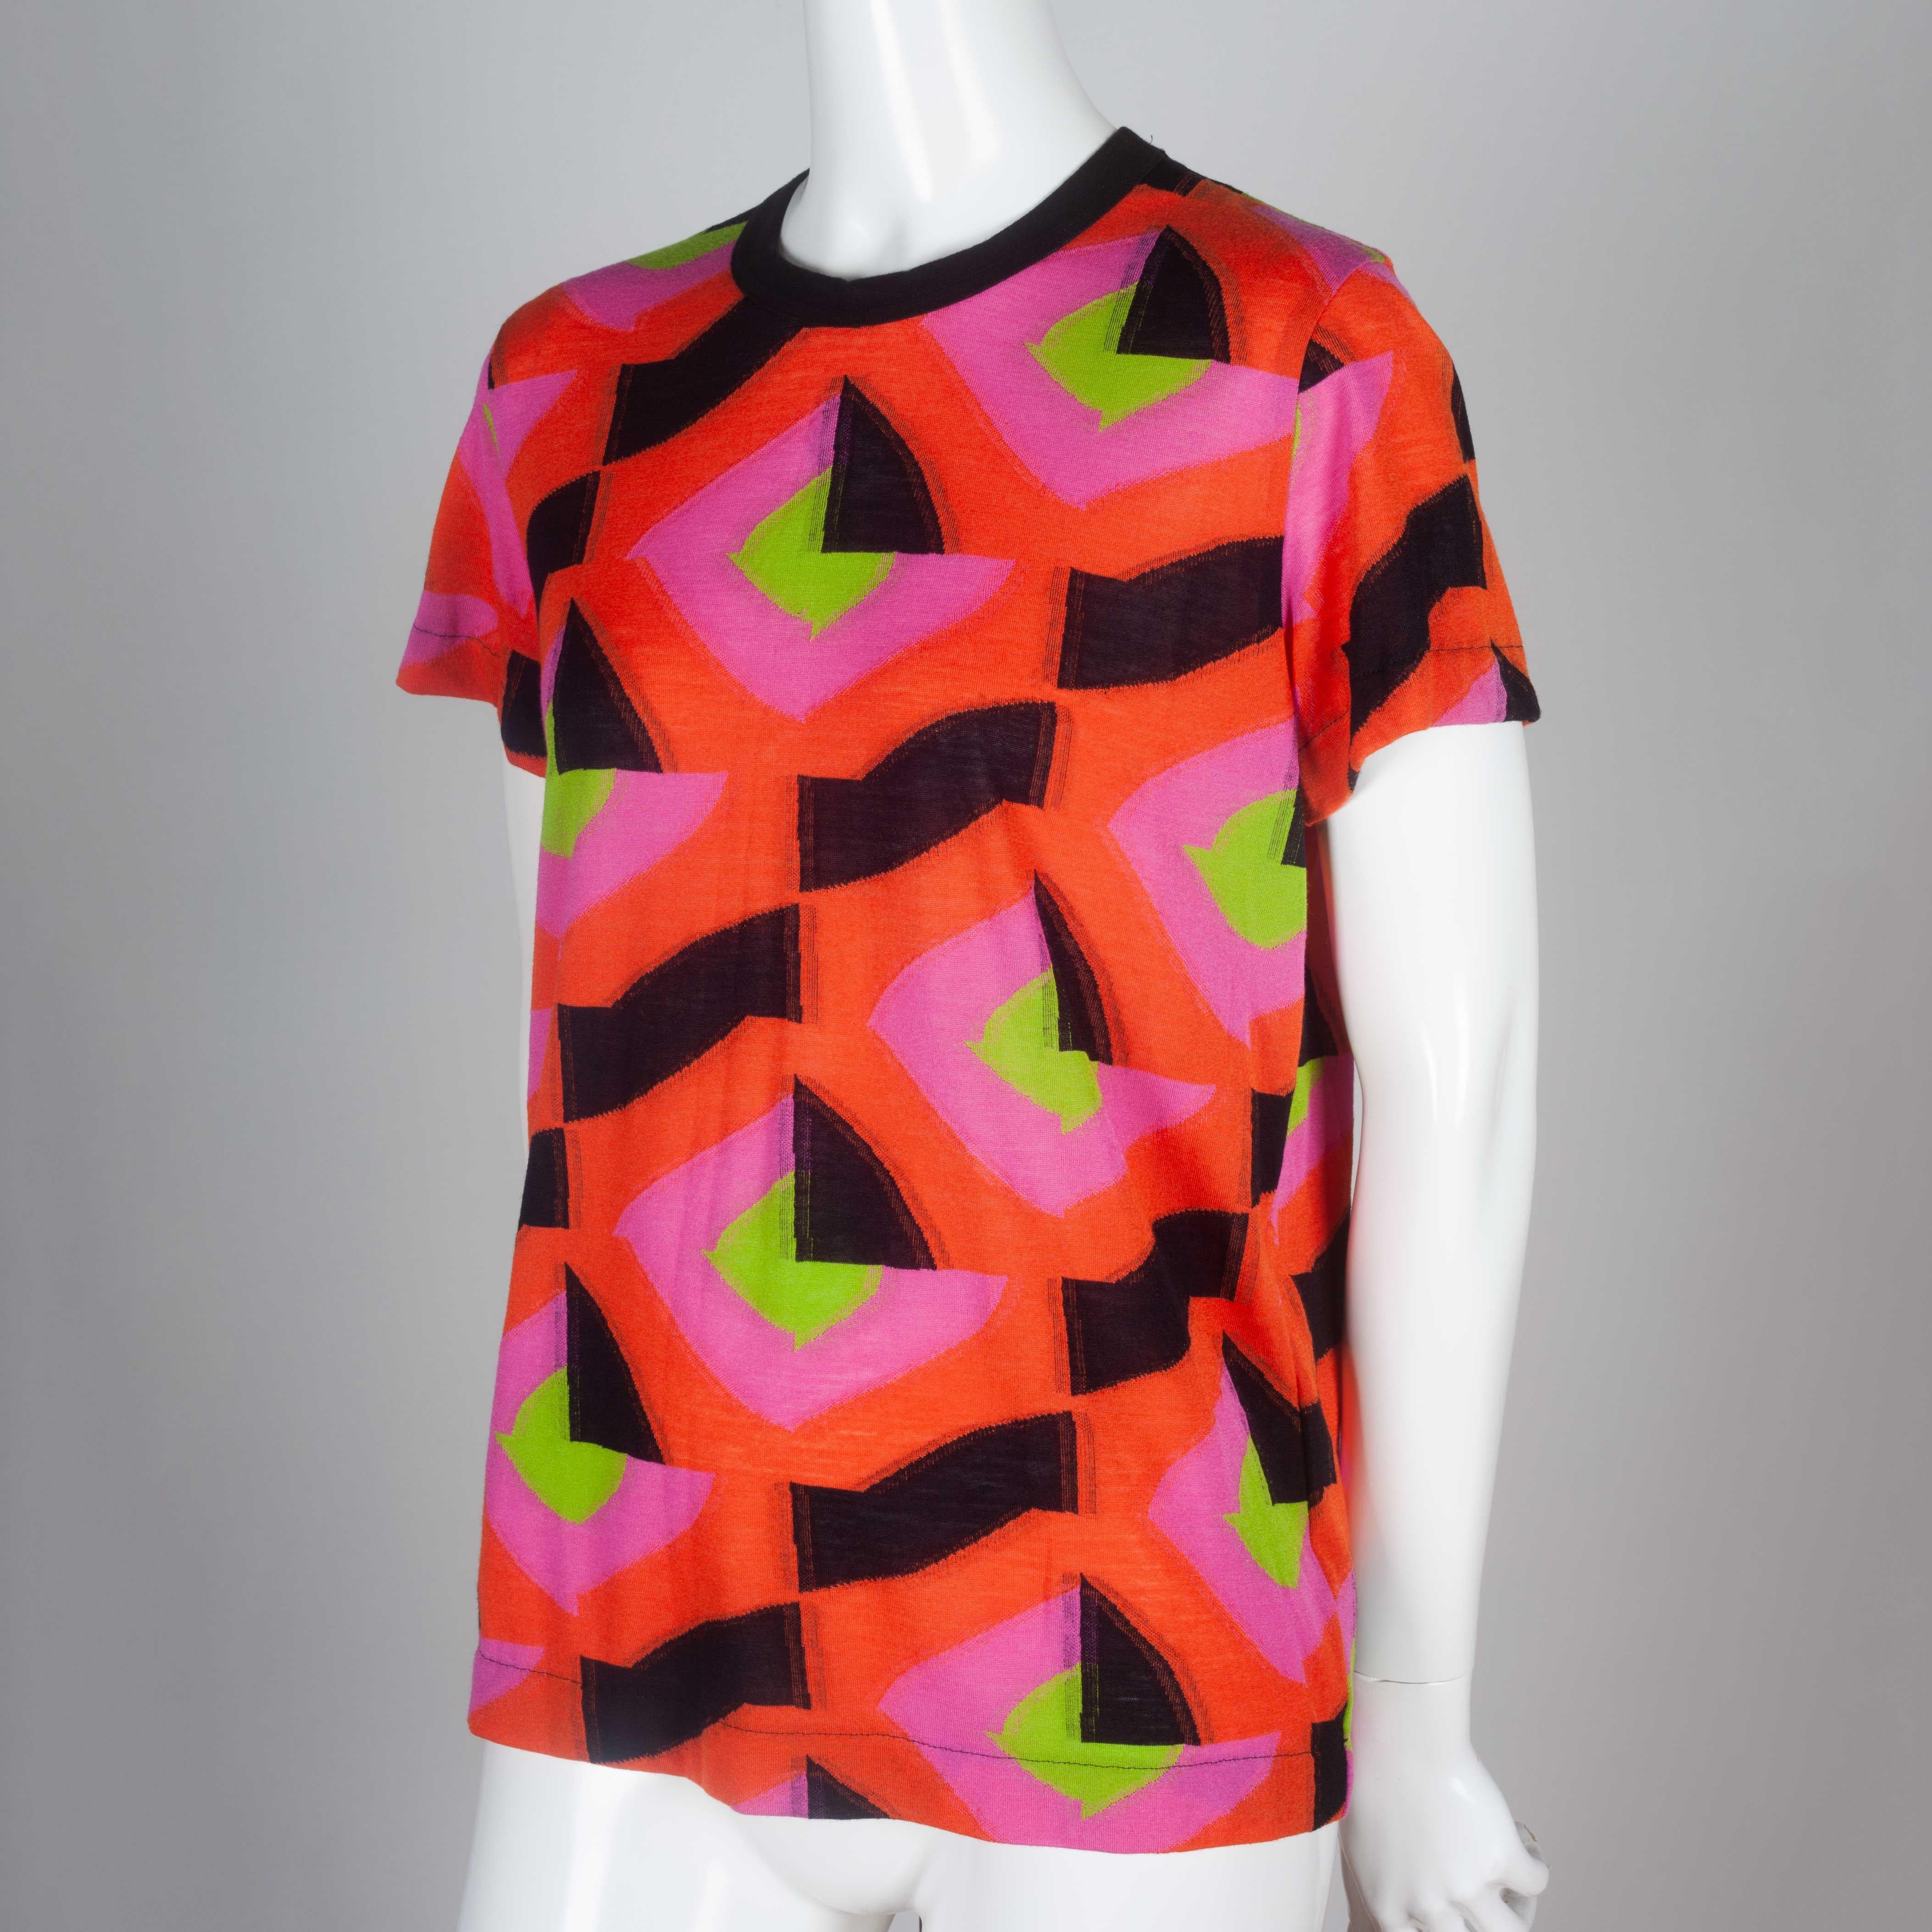 Comme des Garçons Tricot 2015 knit multi-color tee from Japan. The pop colors and geometric shapes, combined with the weaving at the outer edges of the patterns, set the mood for the internet age.

YEAR: 2015
MARKED SIZE: M
US WOMEN'S: M
US MEN'S: